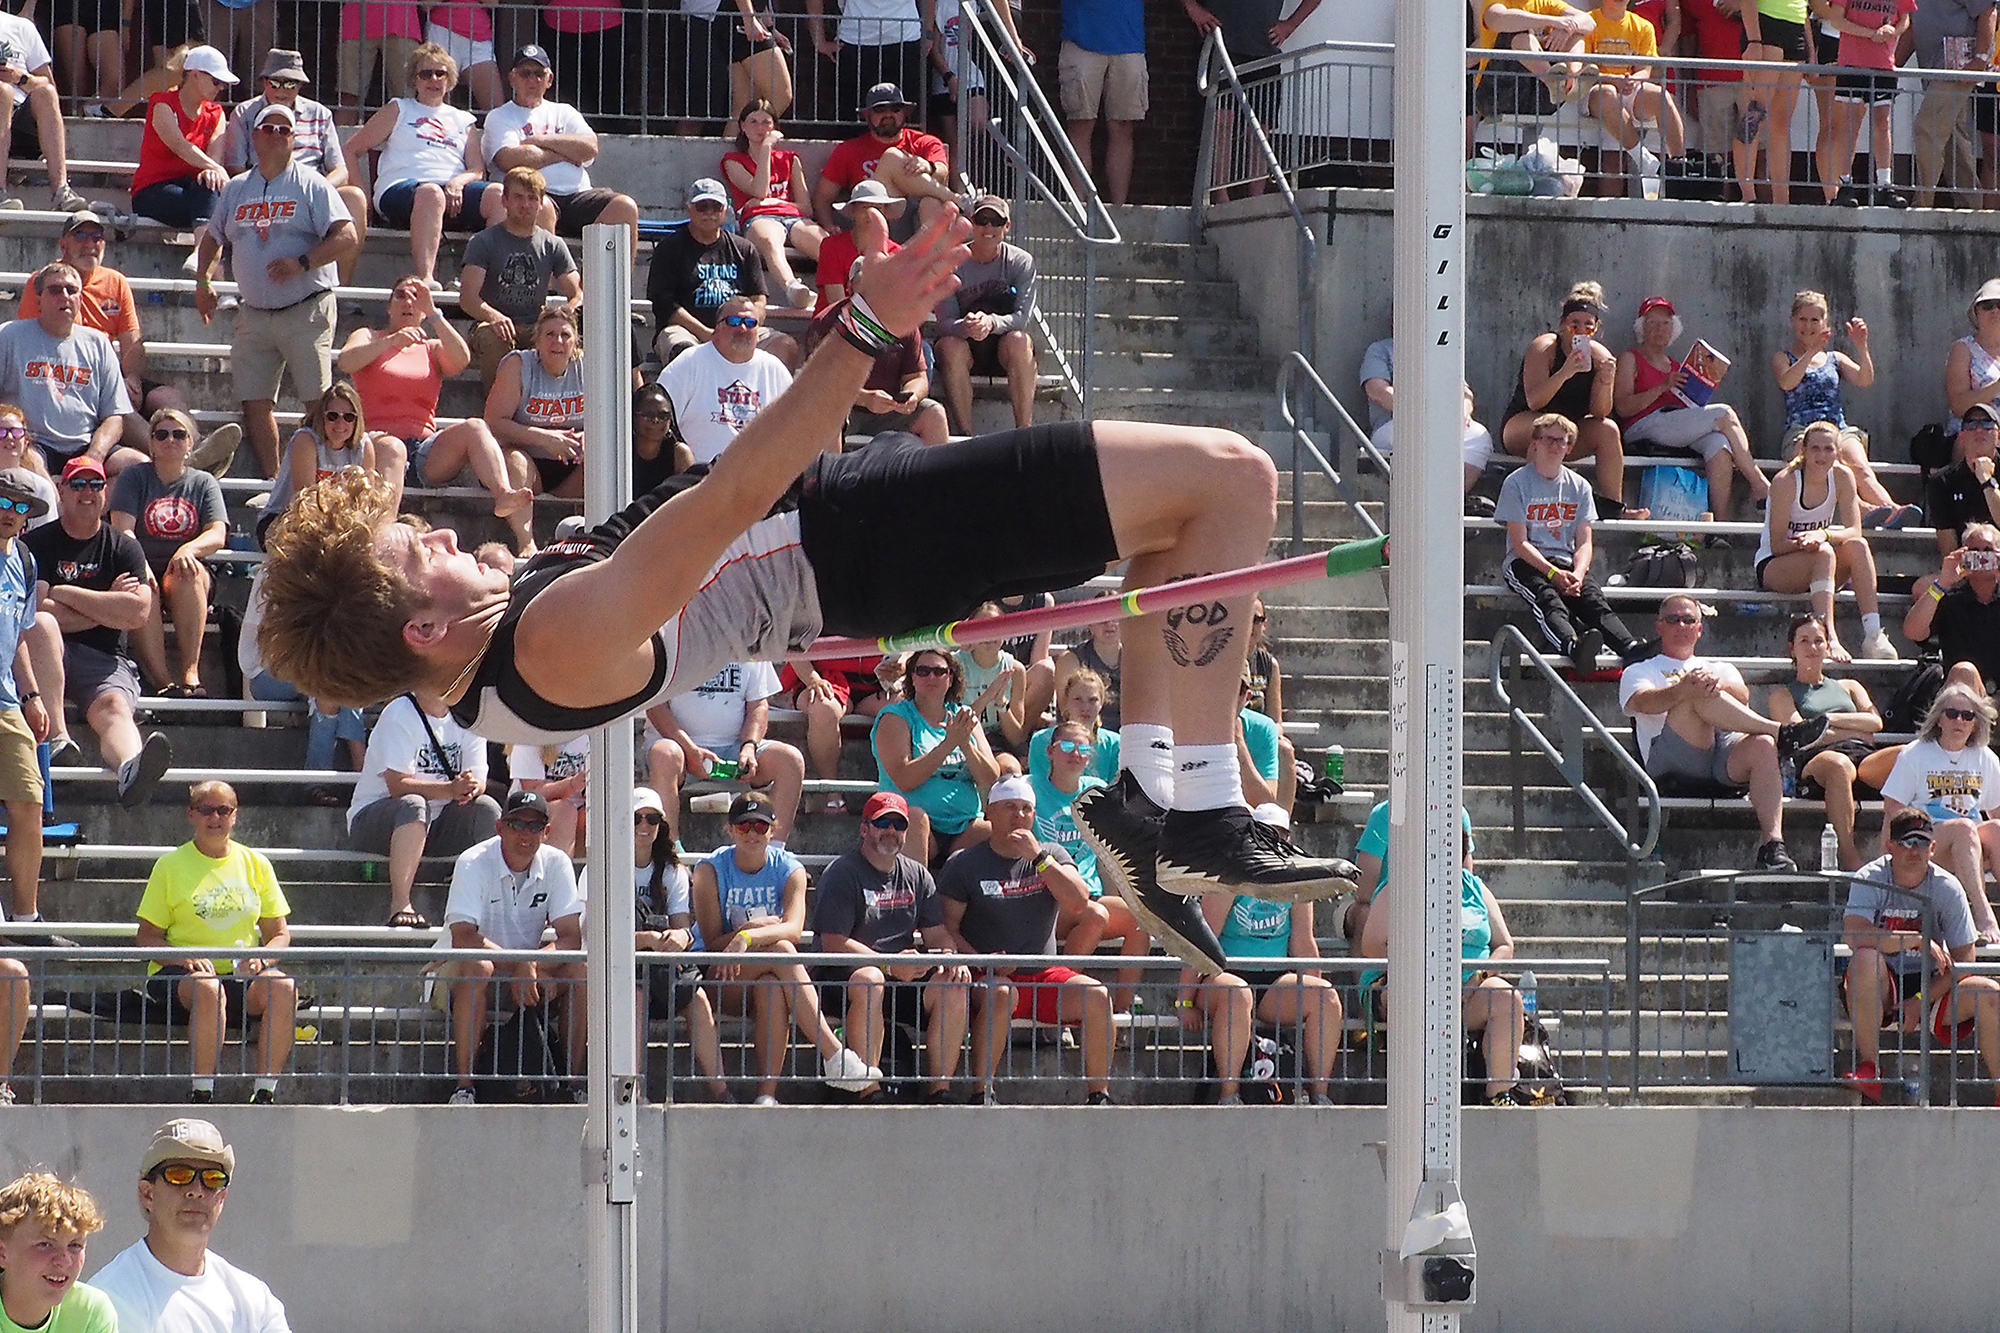 Comets take final flights at State Track and Field Championships